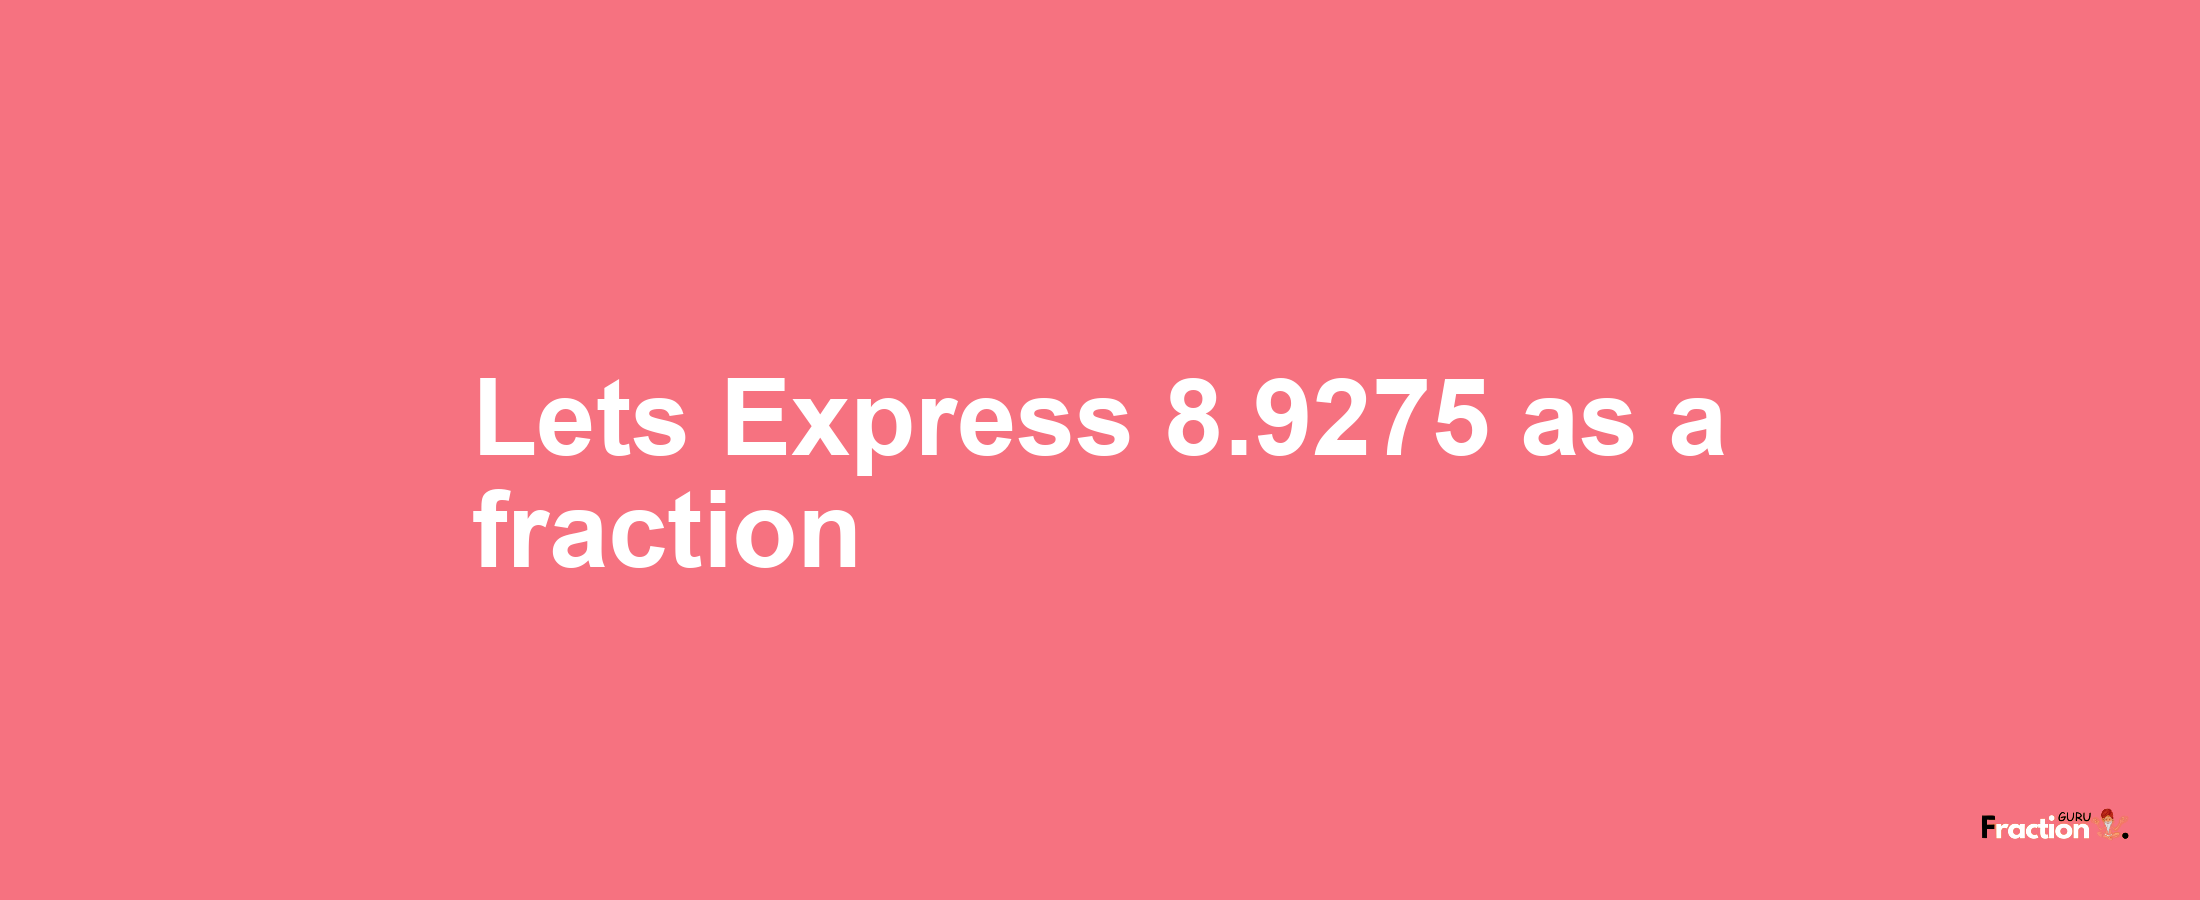 Lets Express 8.9275 as afraction